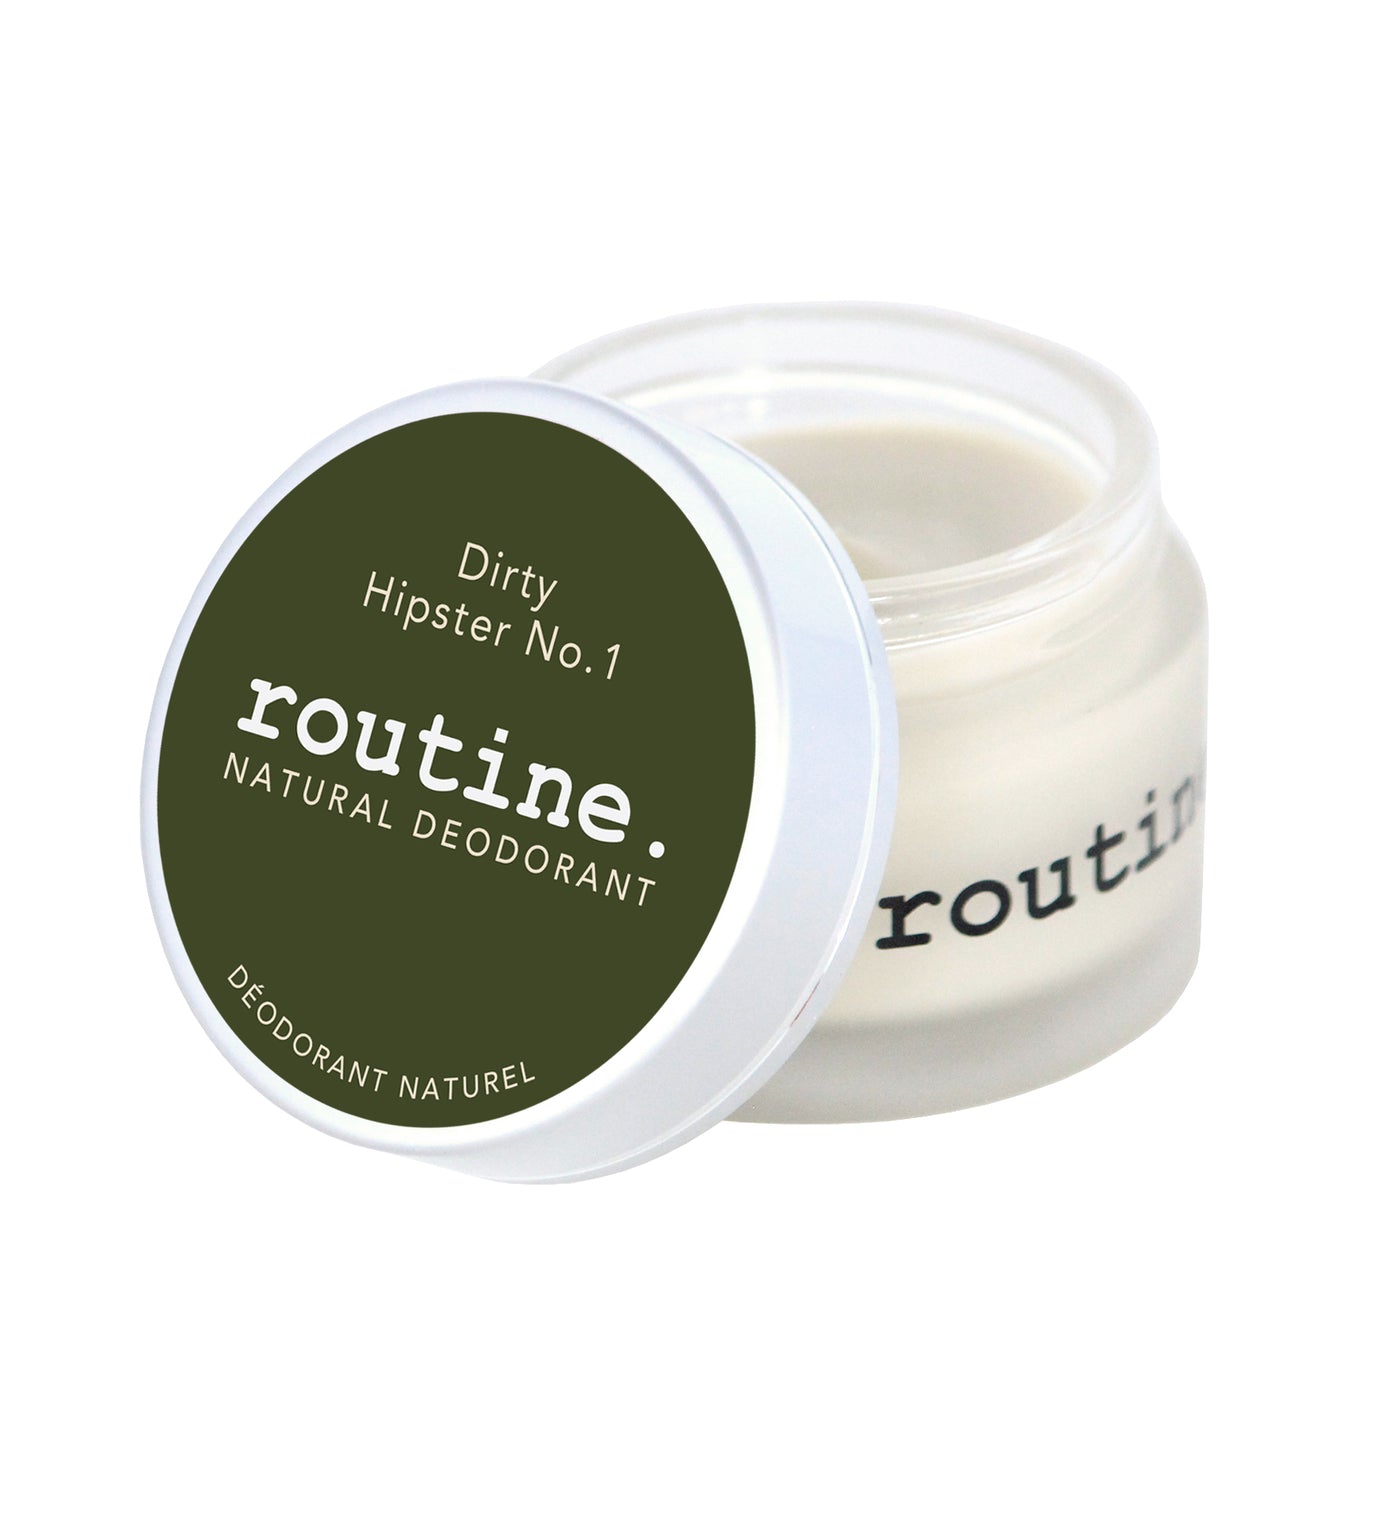 Routine Dirty Hipster no. 1 Deodorant Cream 58g